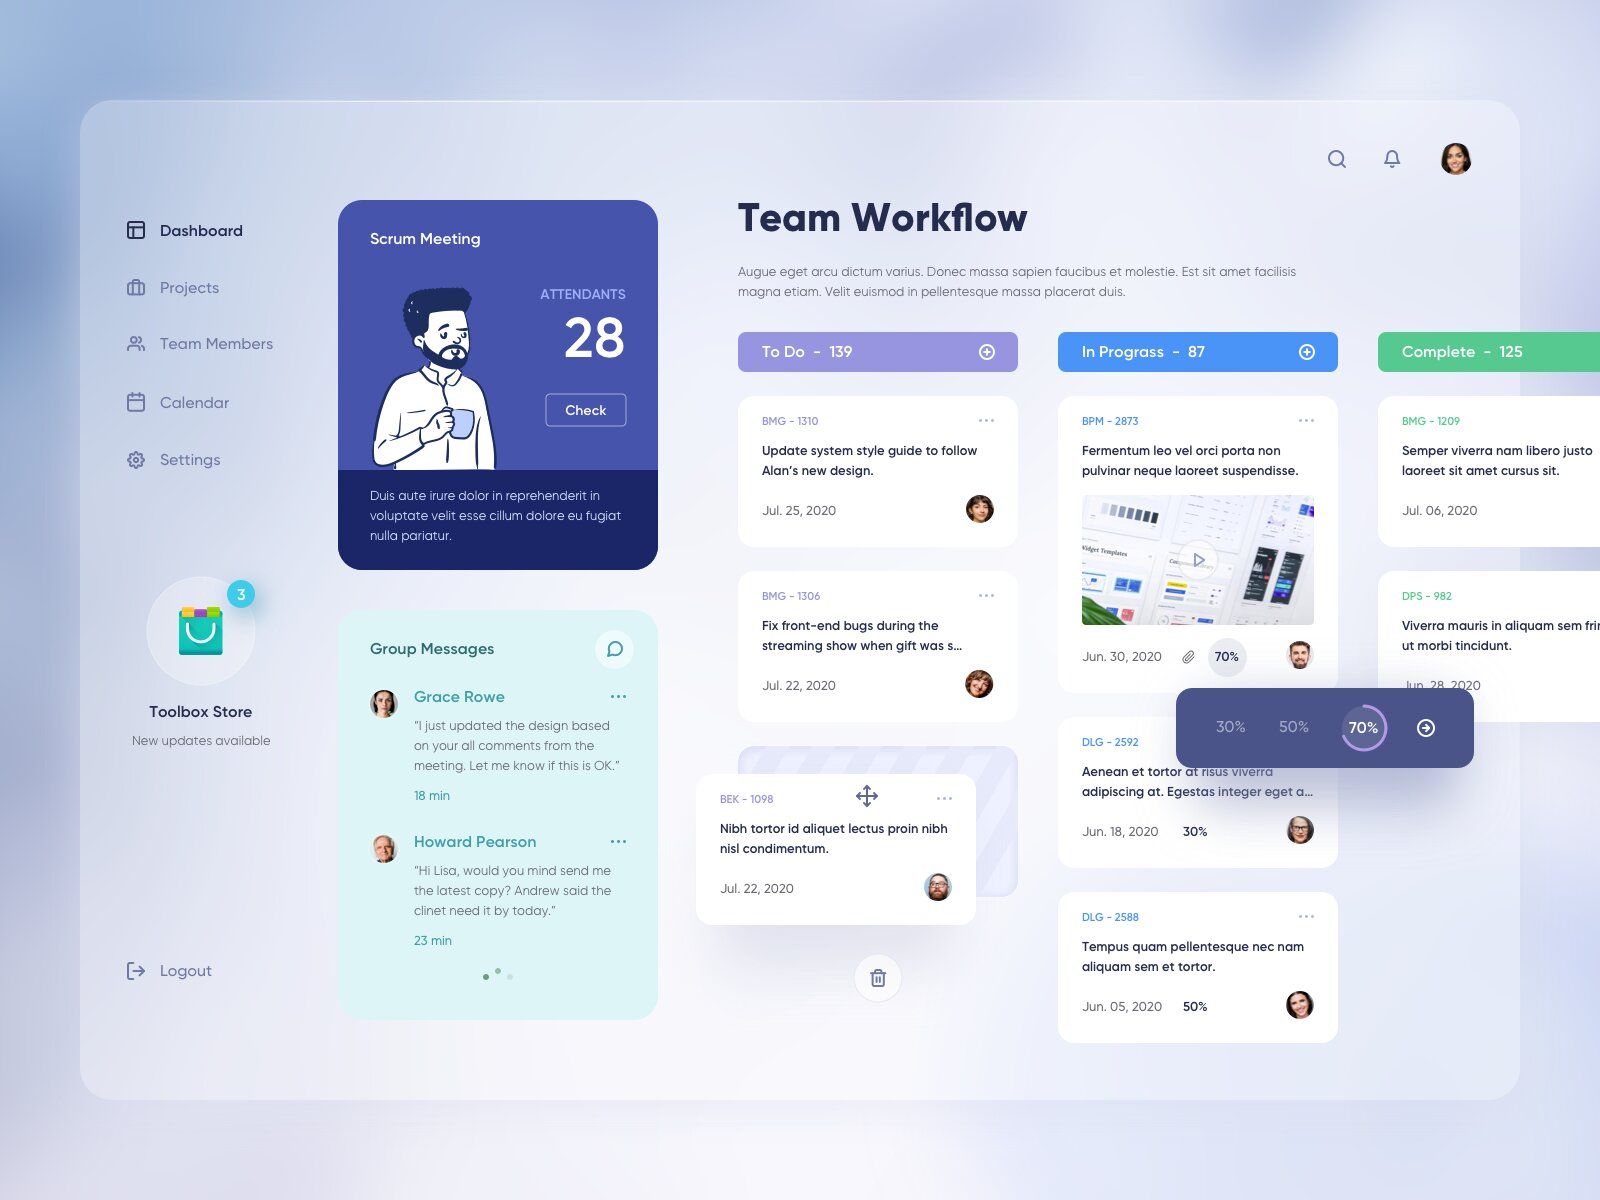 If you want to develop a project management app as a task manager for team members or project managers, you should think about whether you want to integrate it with the existing software project (*image by [Yi Li](https://dribbble.com/coreyliyi){ rel="nofollow" target="_blank" .default-md}*)